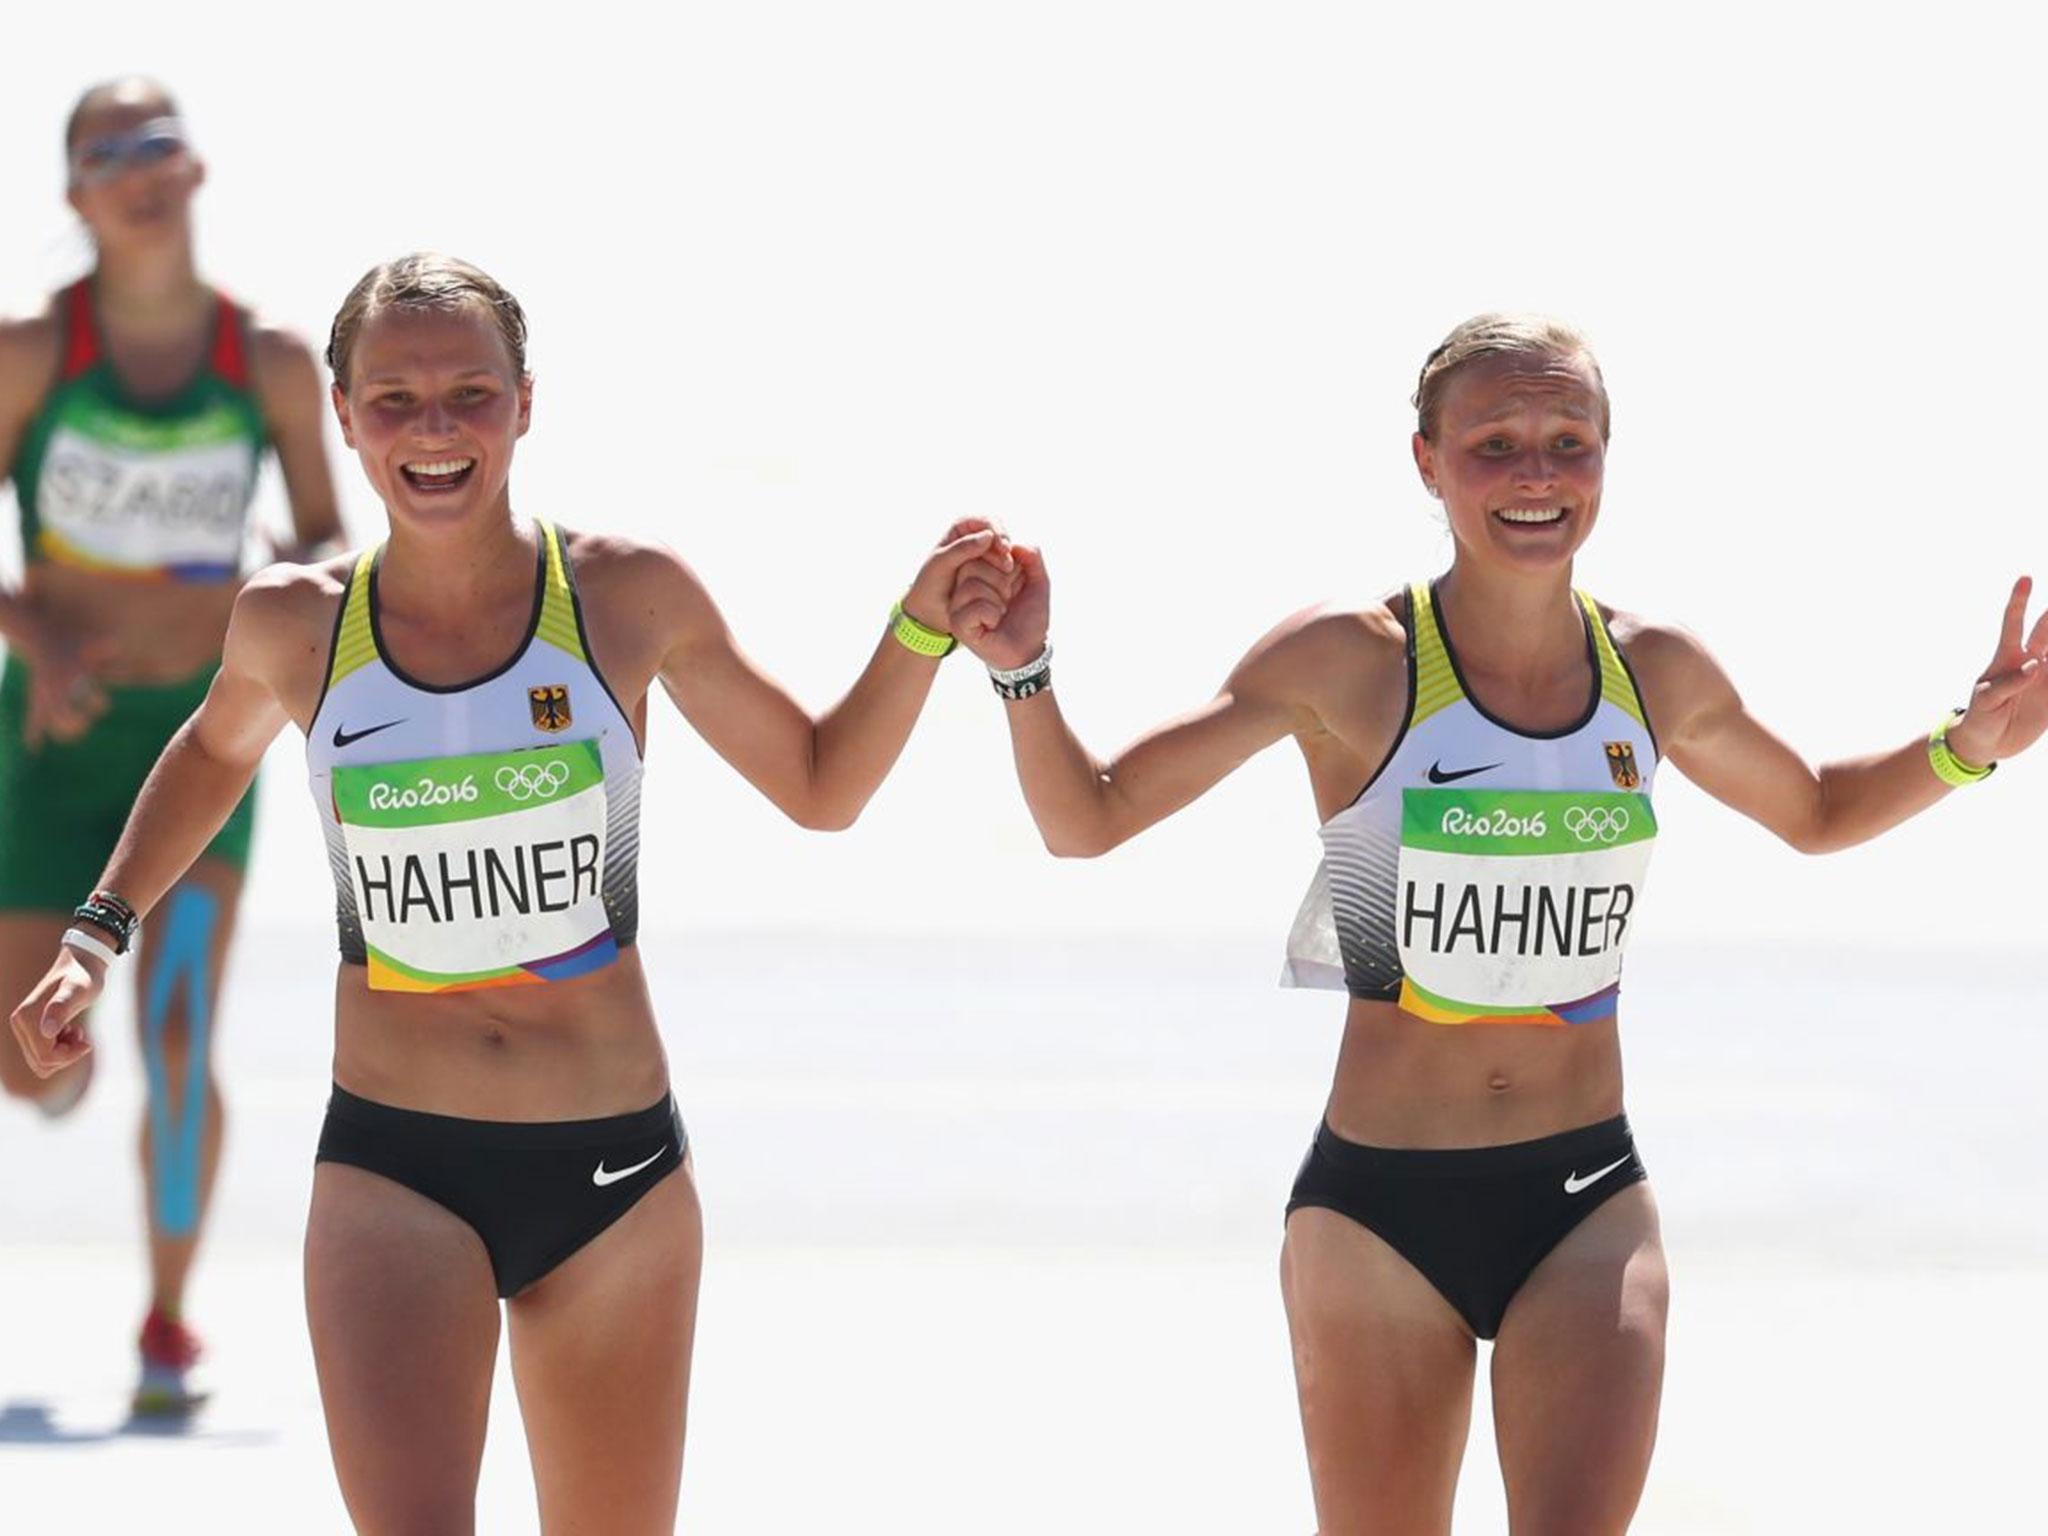 The twins received criticism for joining hands as they approached the finish line